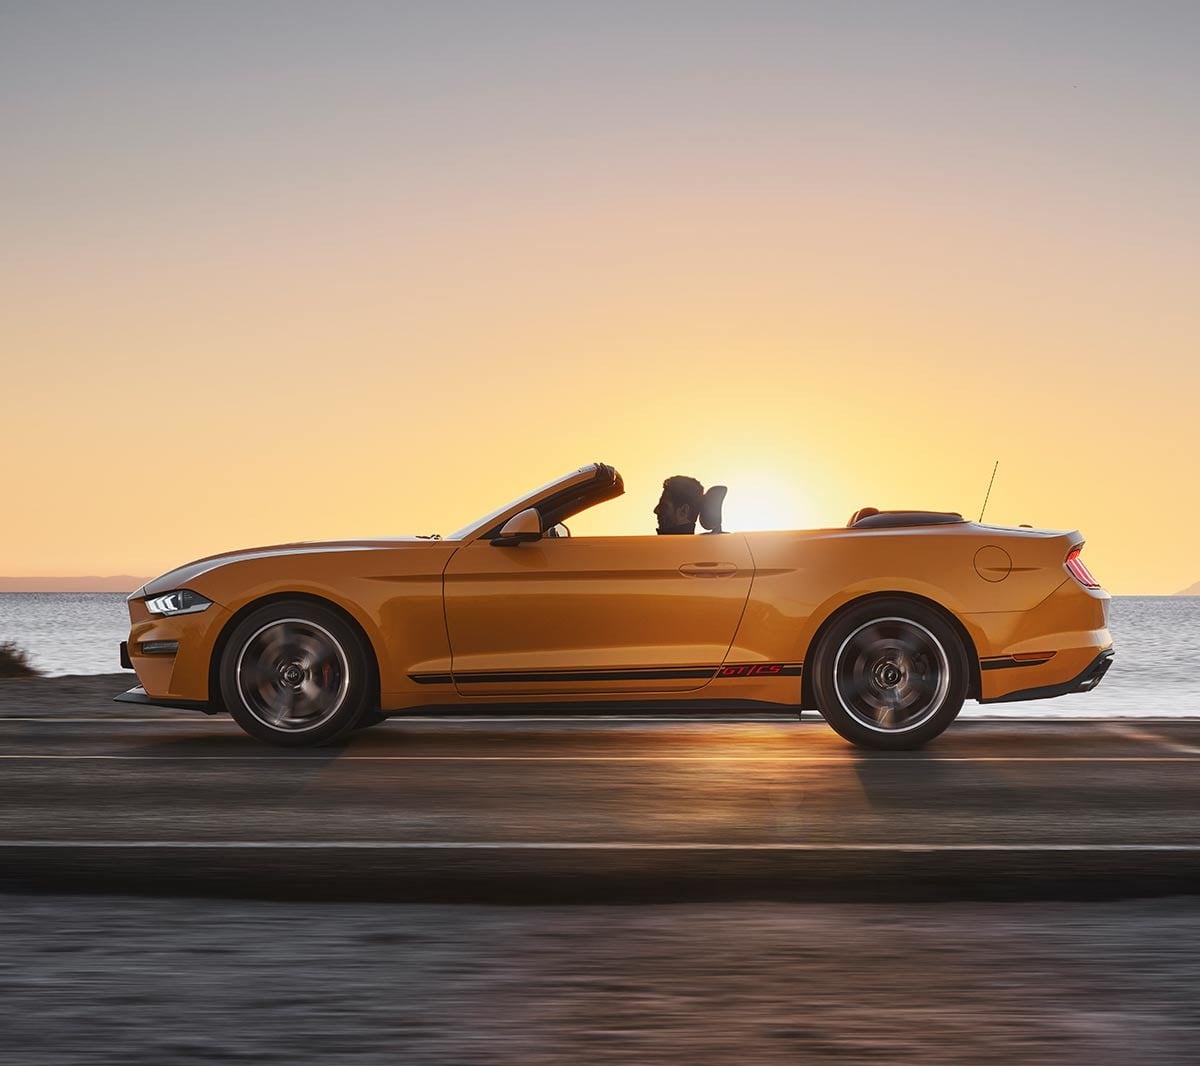 Ford Mustang California Edition driving on a highway against a sunset backdrop.